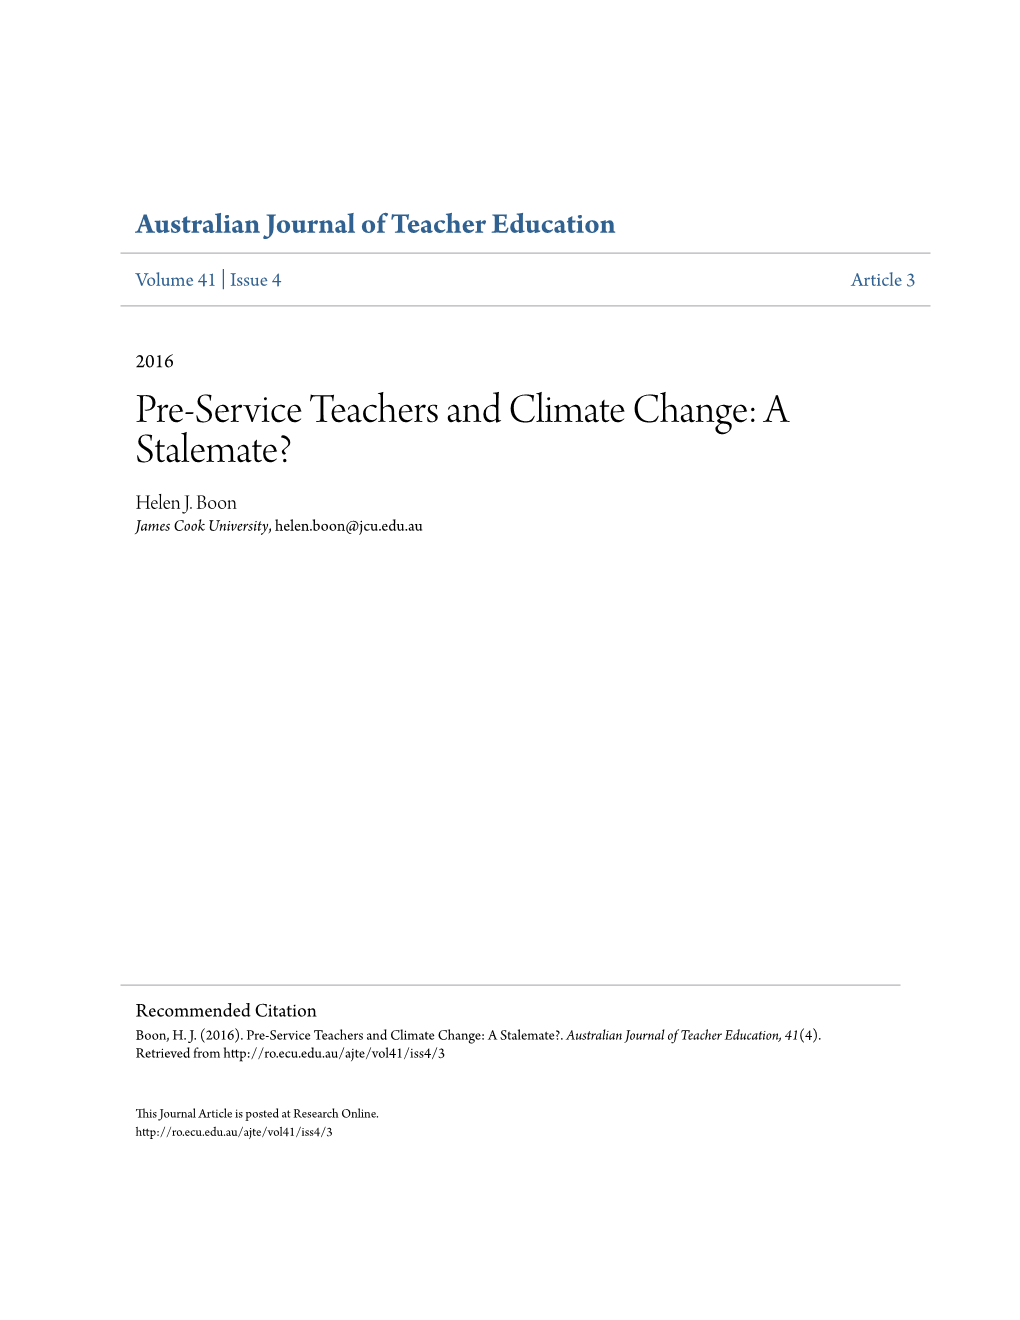 Pre-Service Teachers and Climate Change: a Stalemate? Helen J